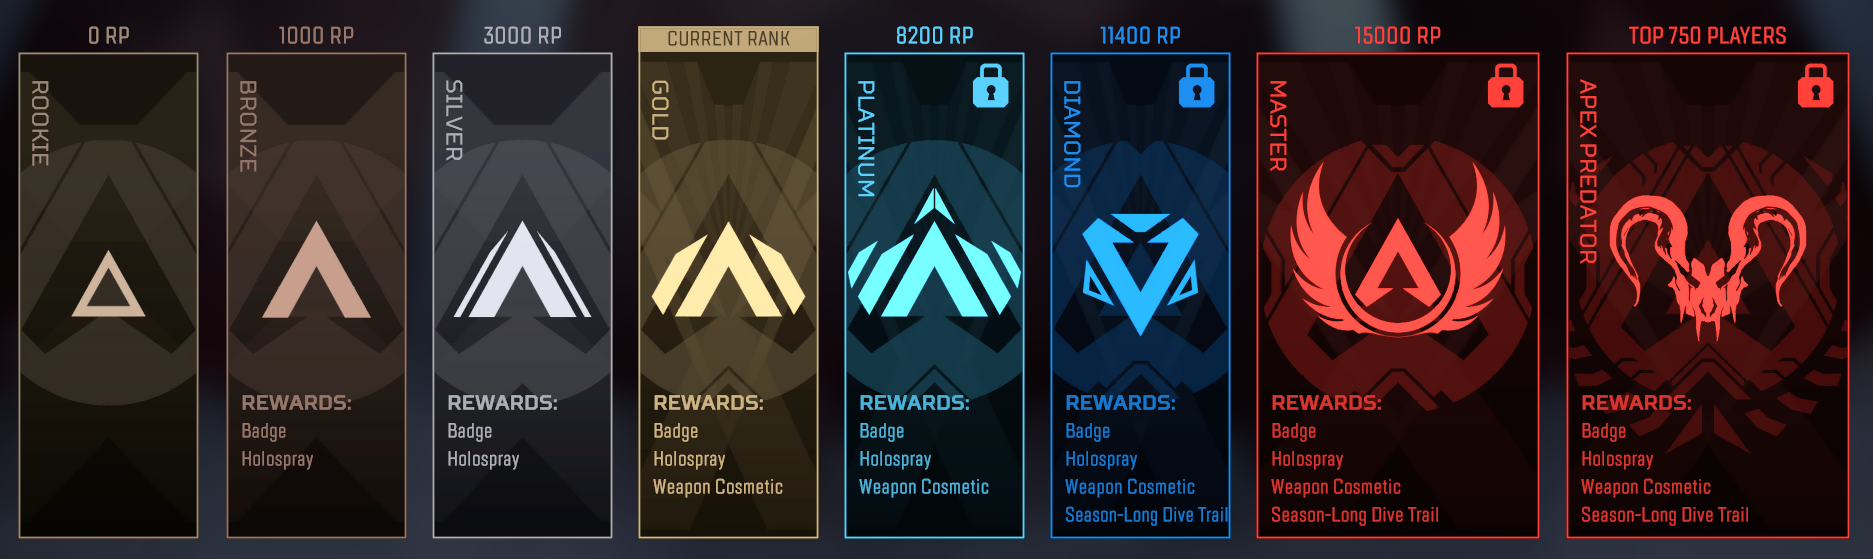 Apex Legends Mobile Ranked: Rewards, Tiers, and How To Unlock